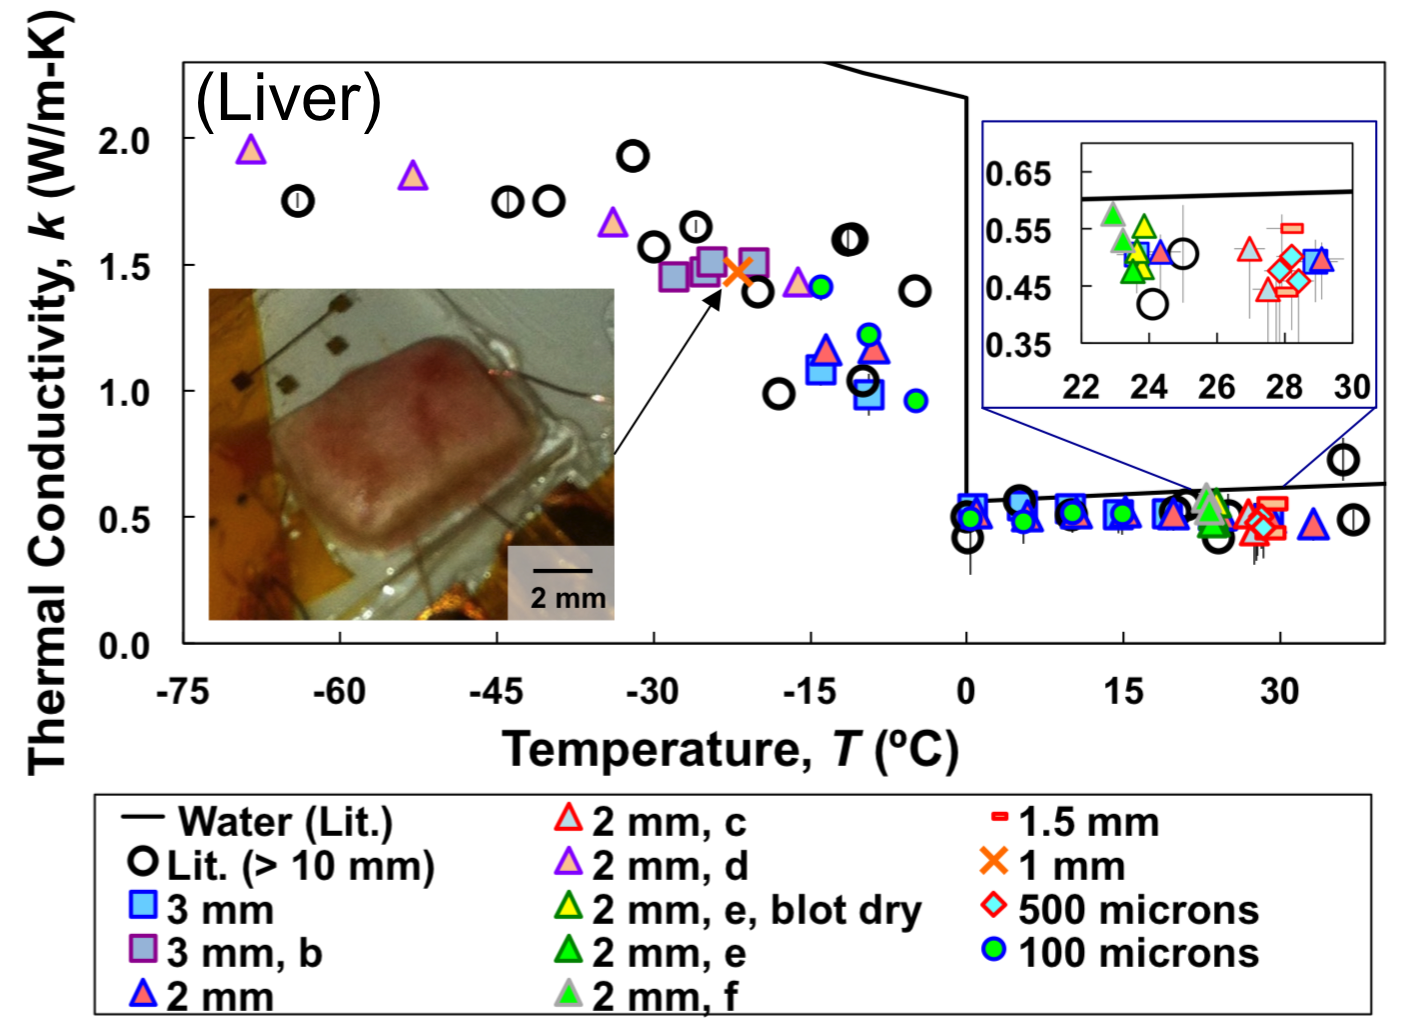 Data for the measurement of the thermal conductivity of mouse liver ranging from 3 mm to less than 1 mm thick